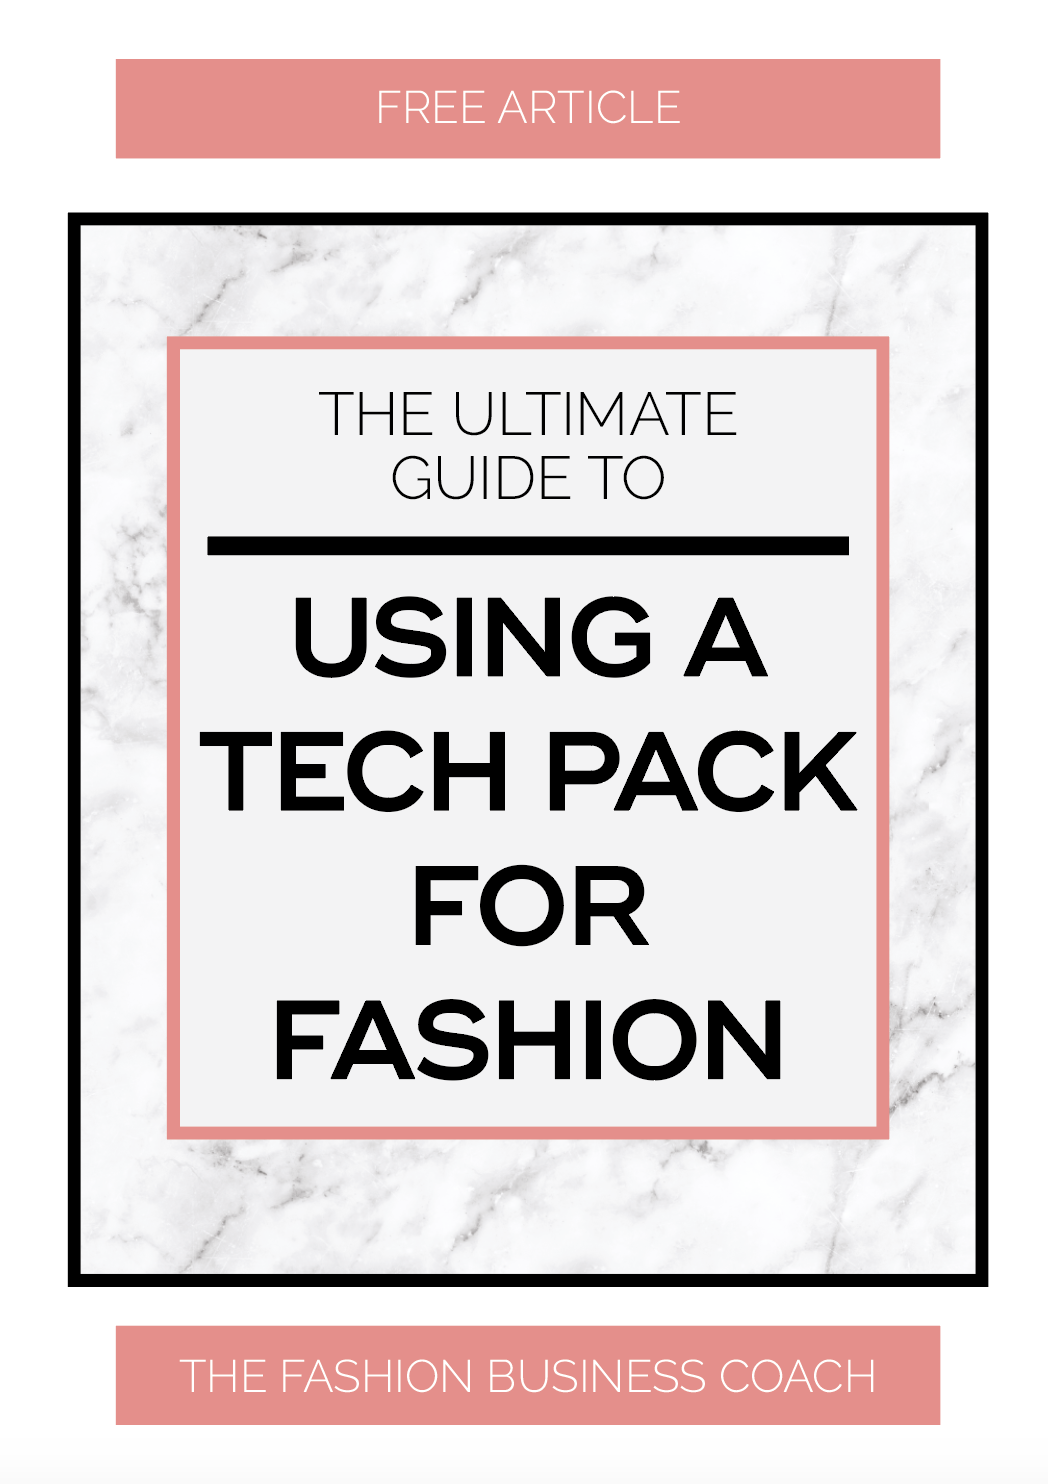 The Ultimate Guide To Using a Tech Pack For Fashion 1.png